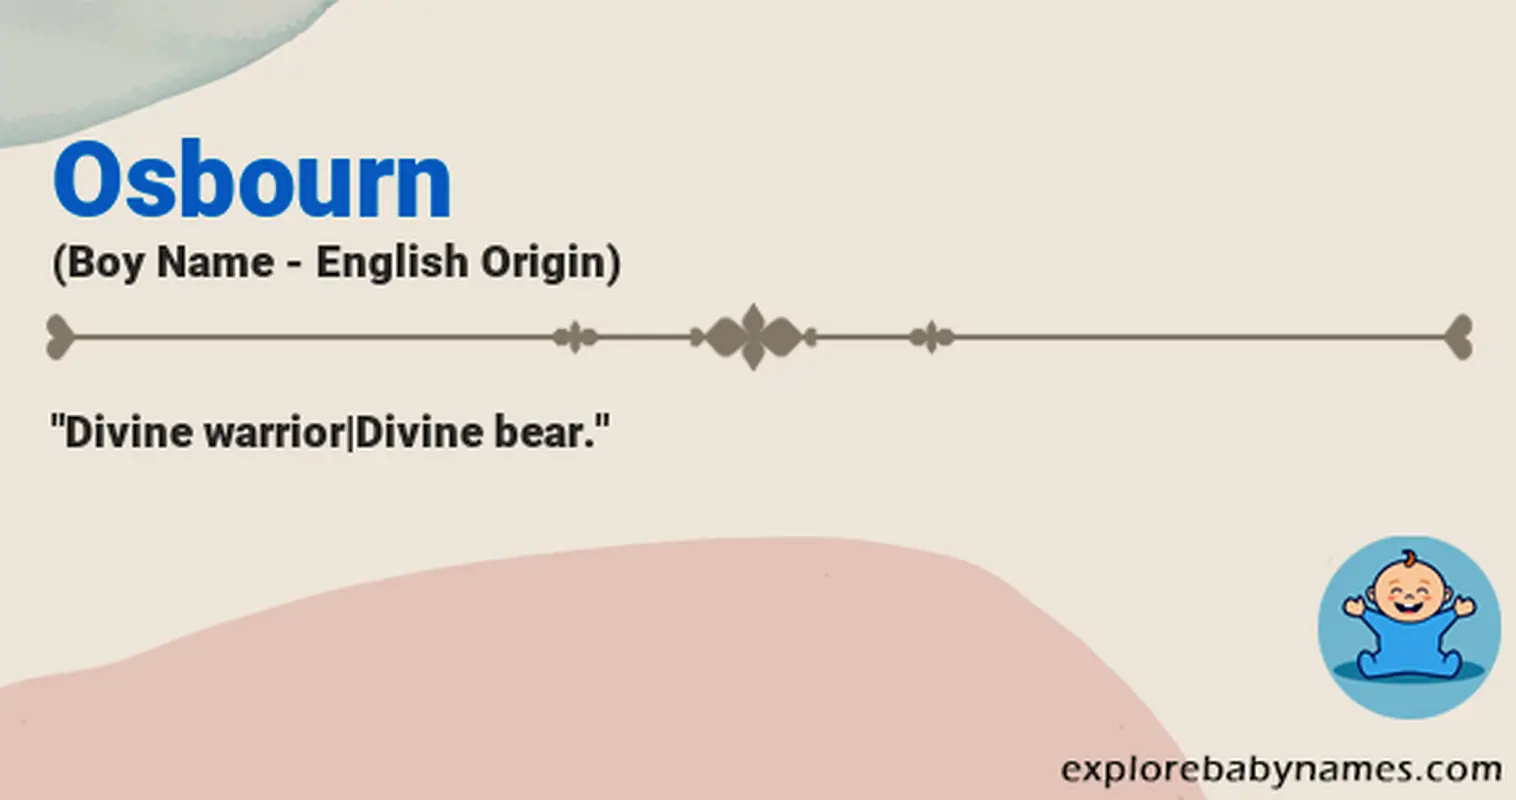 Meaning of Osbourn